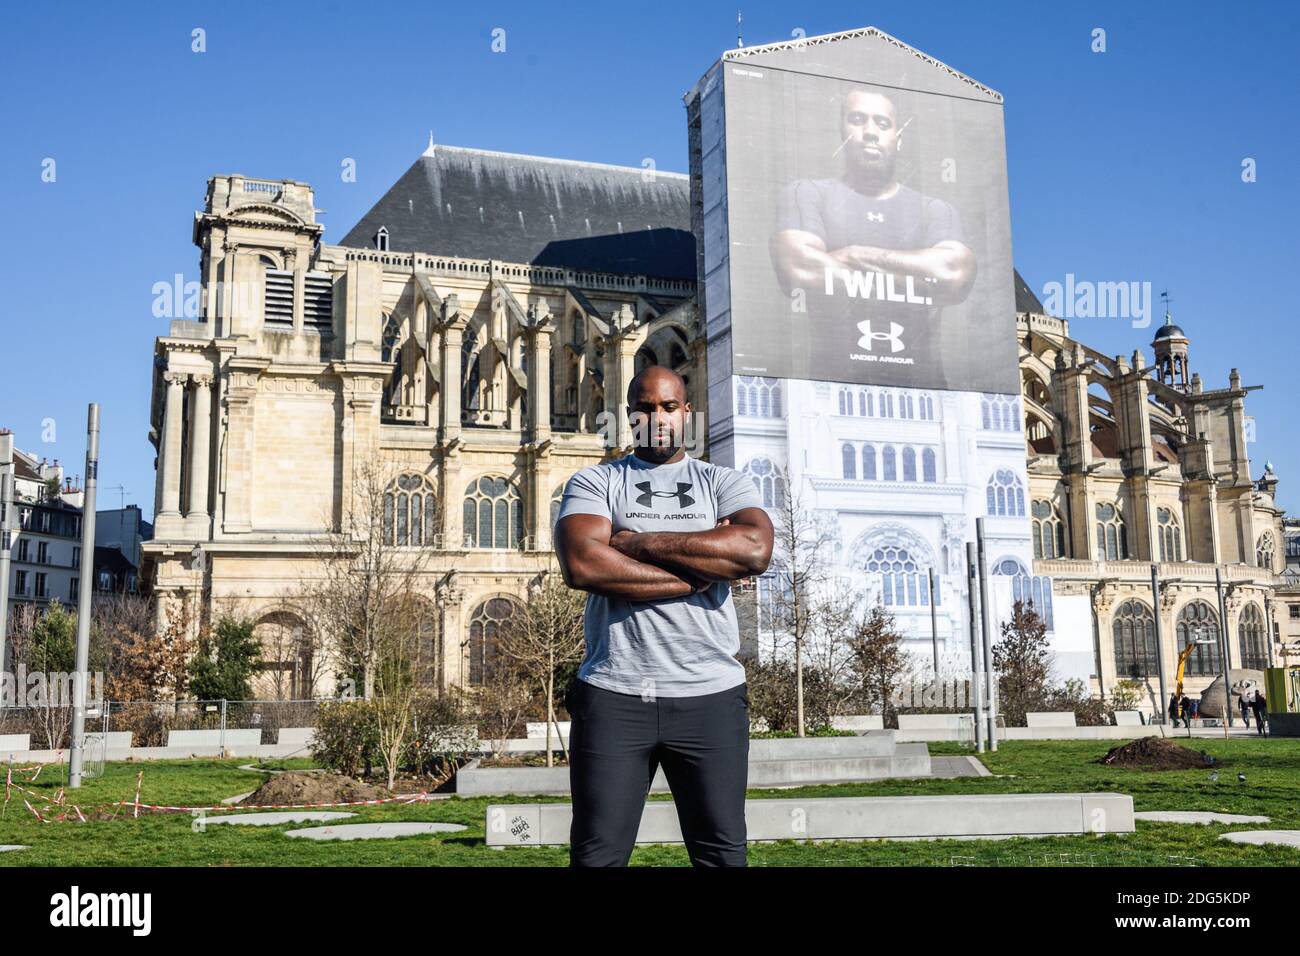 US sportswear brand Under Armour new icon, french judo olympic champion Teddy during a press presentation held in front of Saint Eustache church in the center of Paris, France on